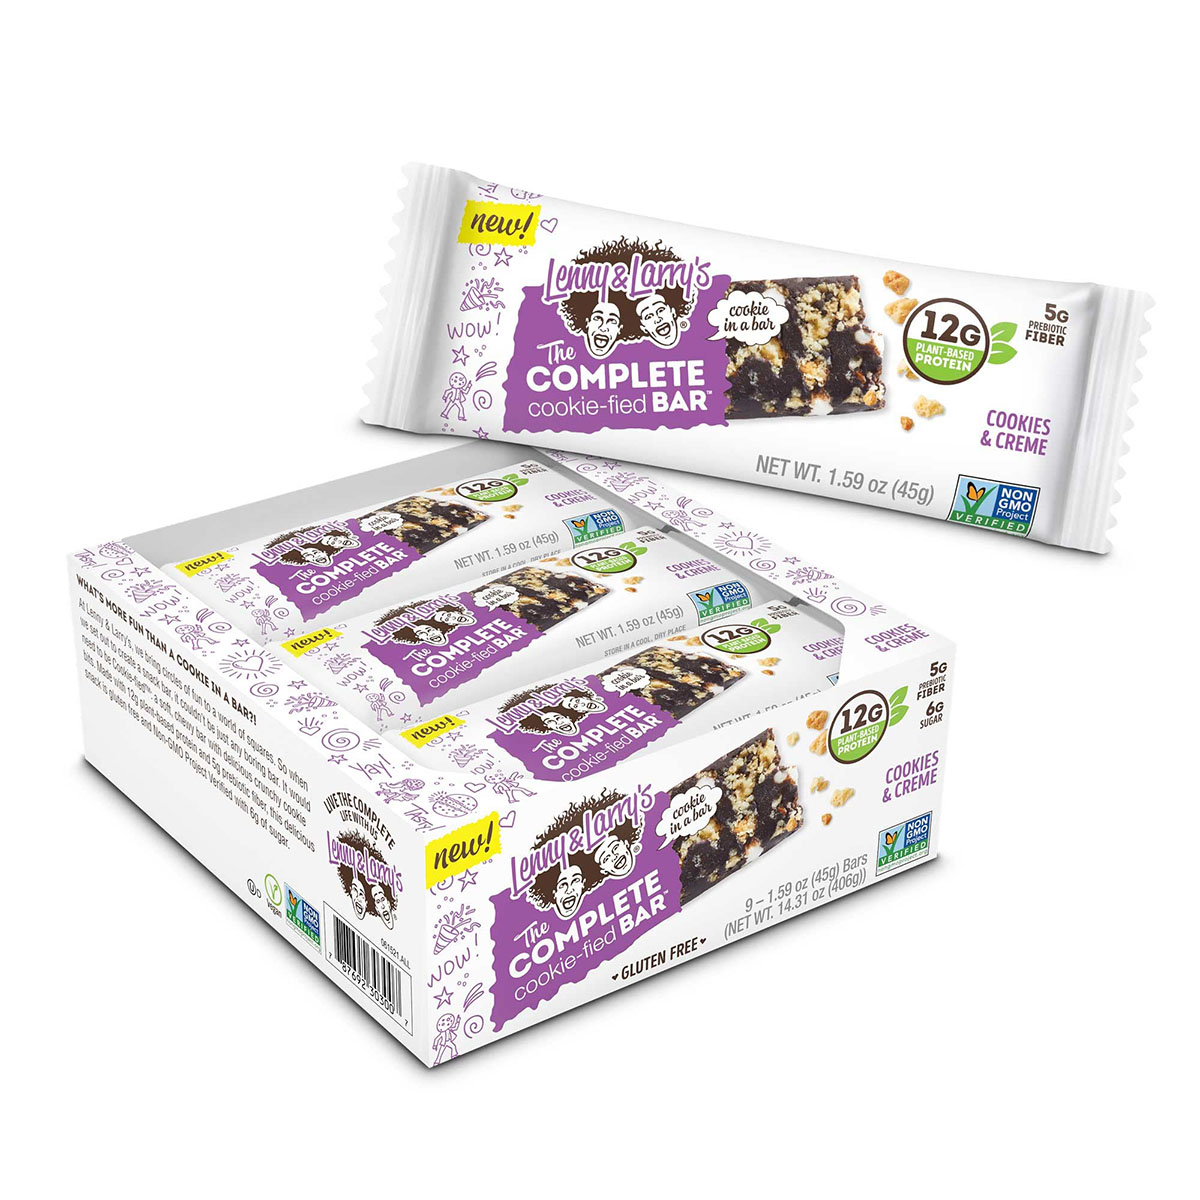 Lenny & Larry’s The Complete Cookie-fied Bar Cookies and Cream Box of 9 Bars